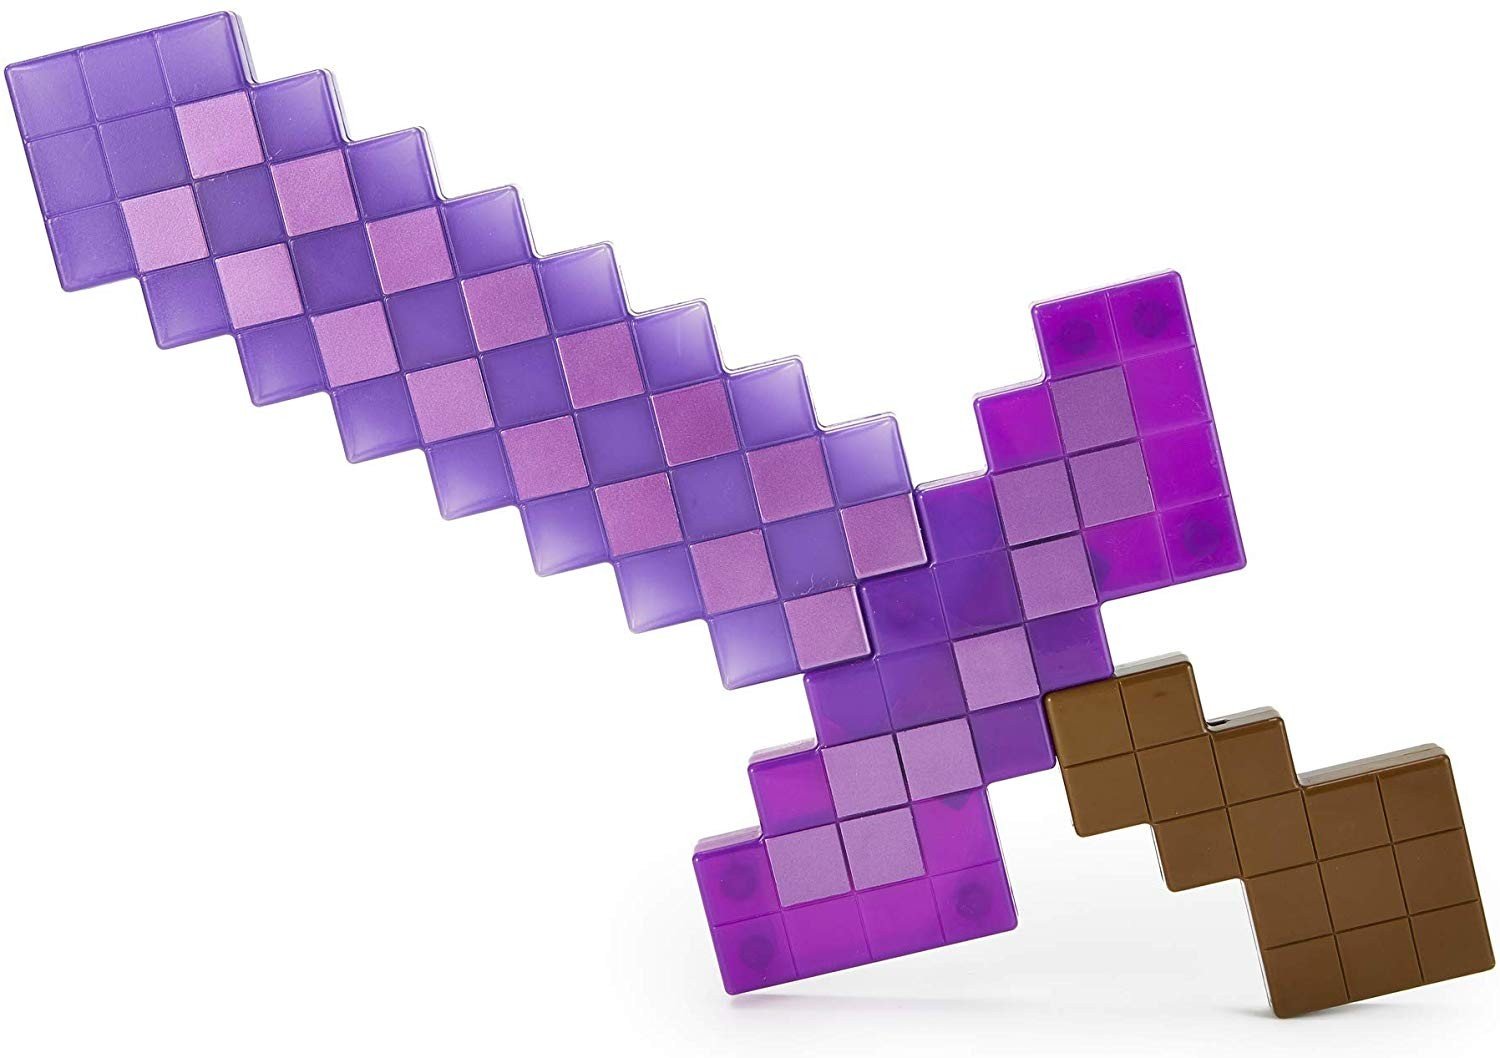 What is the title of this picture ? Buy Minecraft - Enchanted Sword (GDL21)